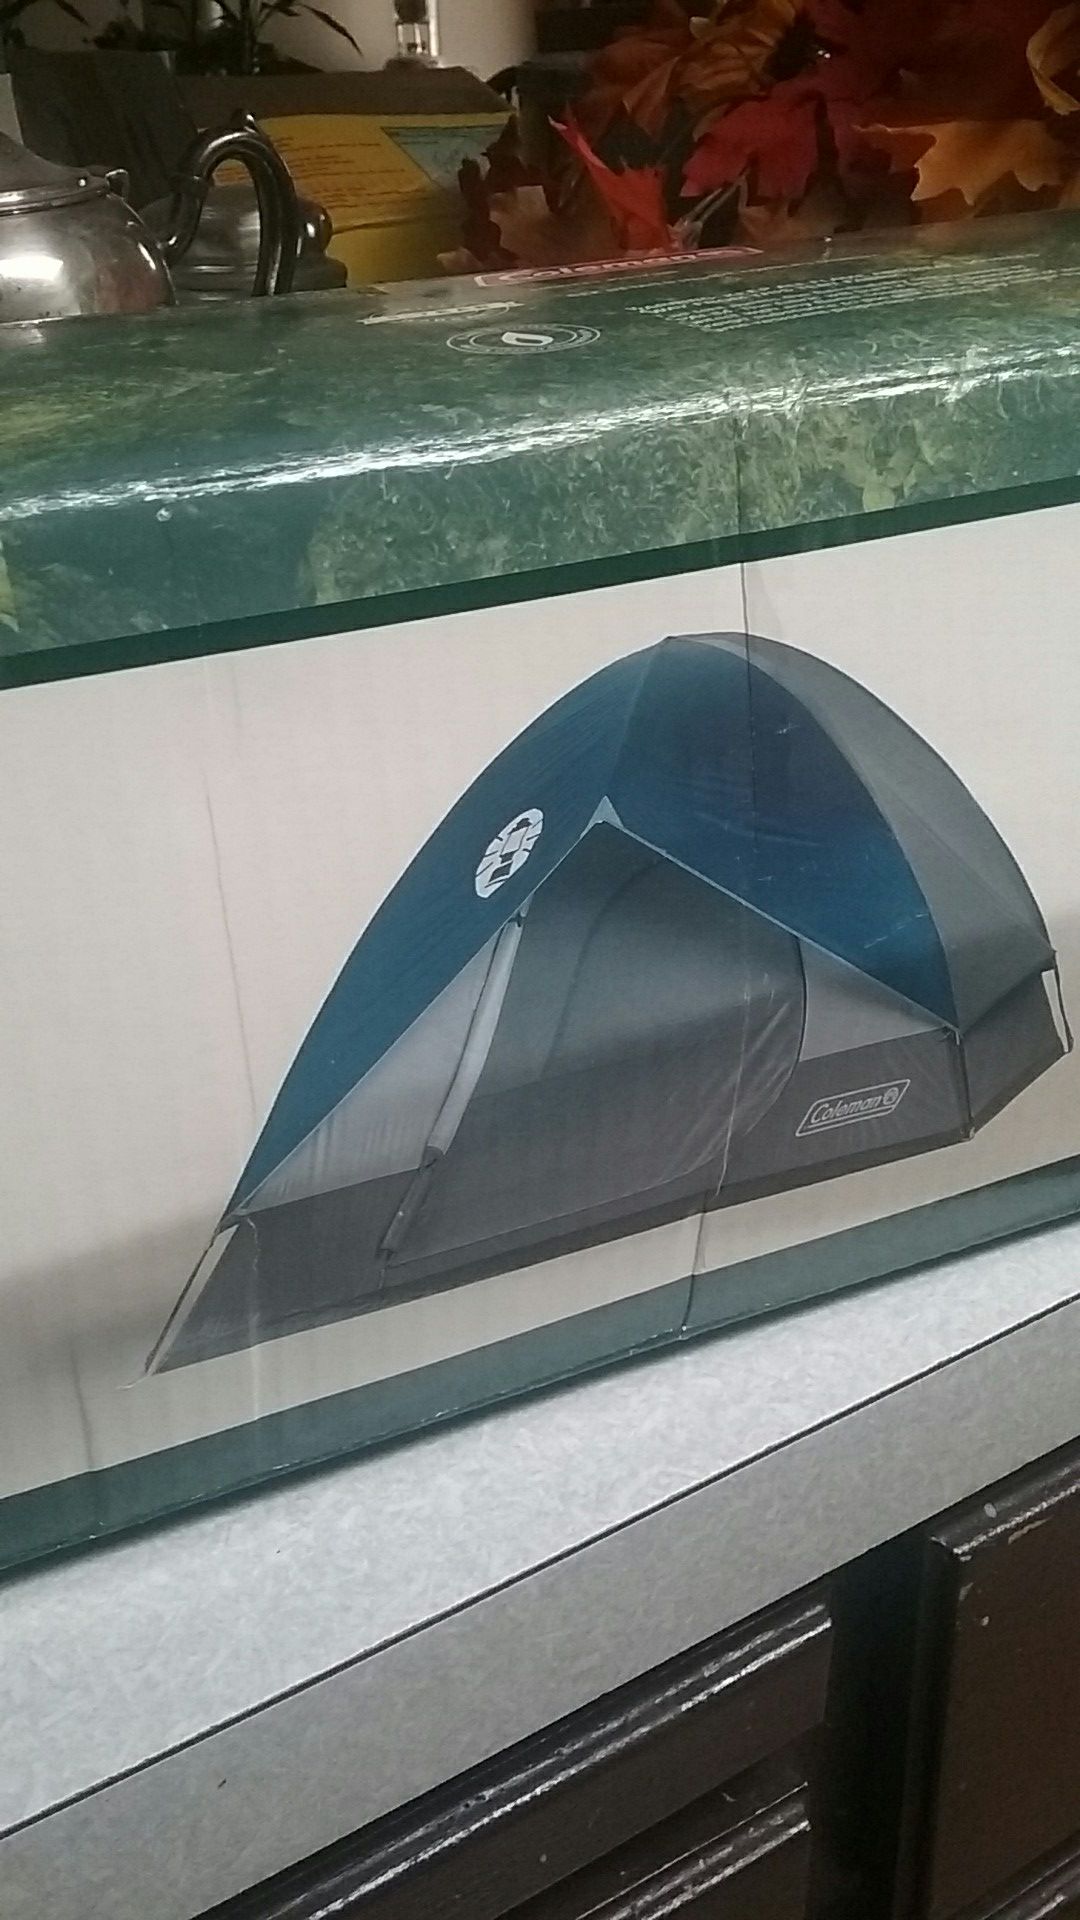 brand new In box Coleman tent